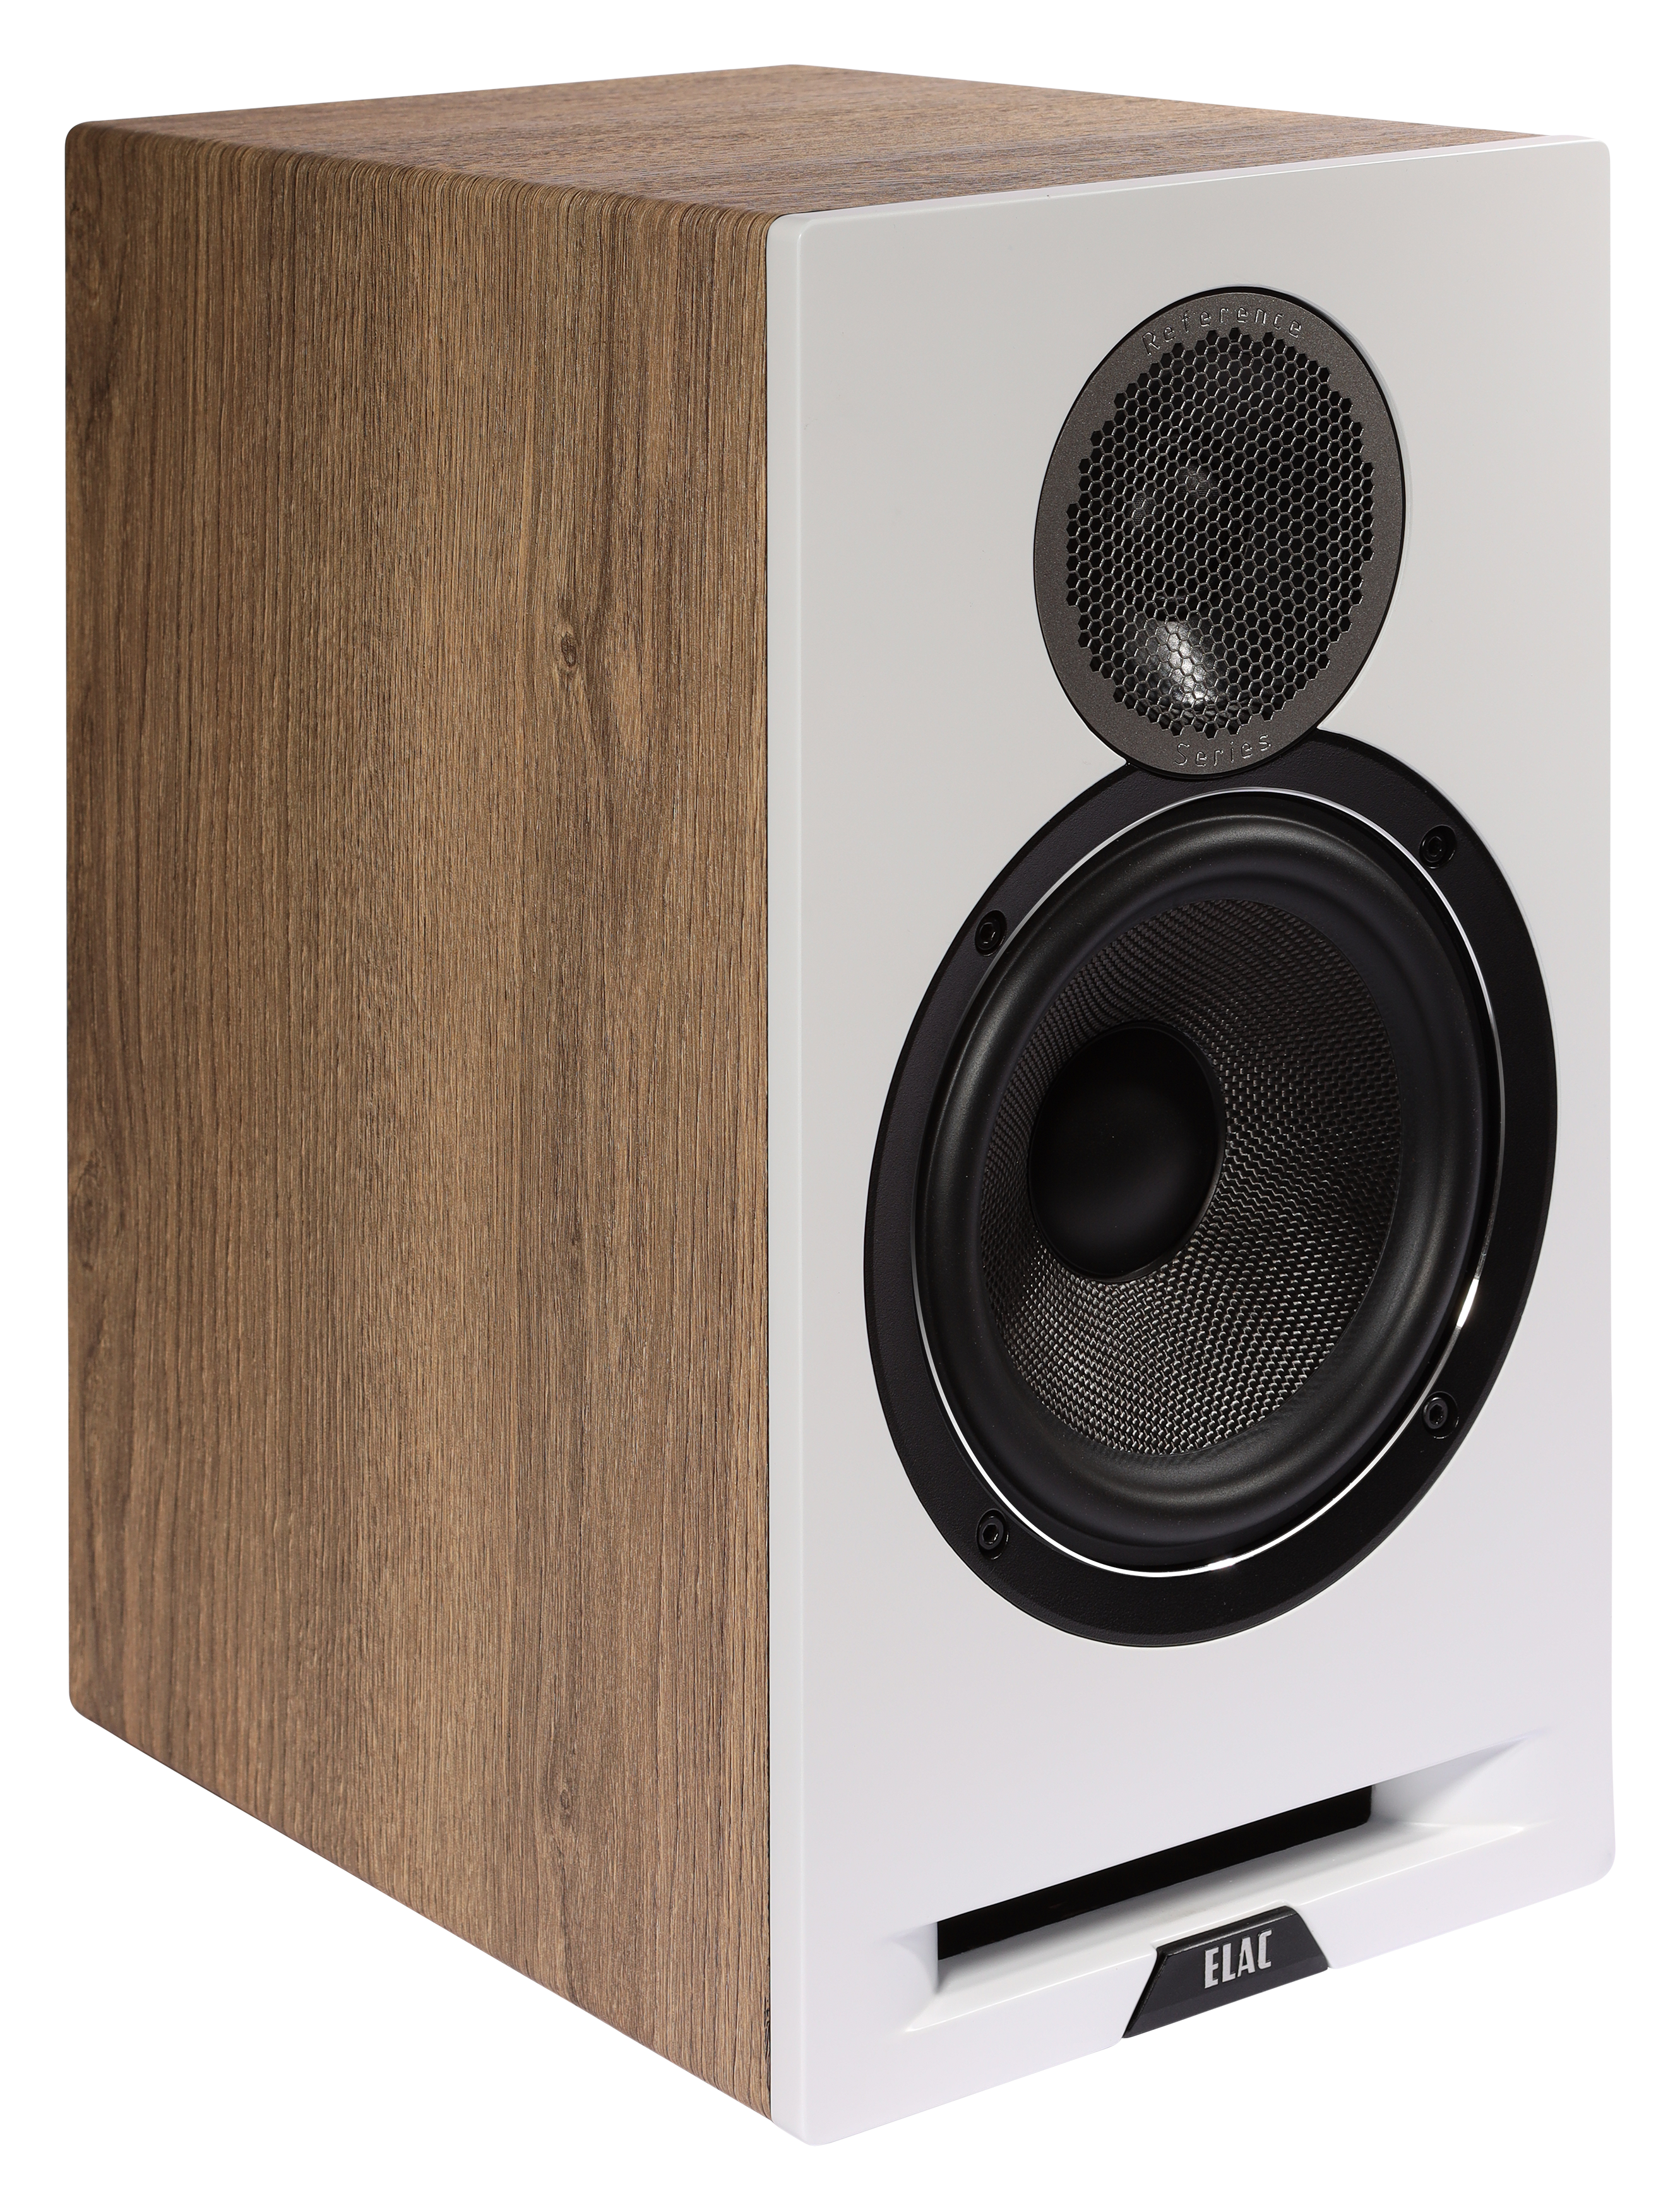 DBR62 Debut Reference Bookshelf Home Theater Speakers